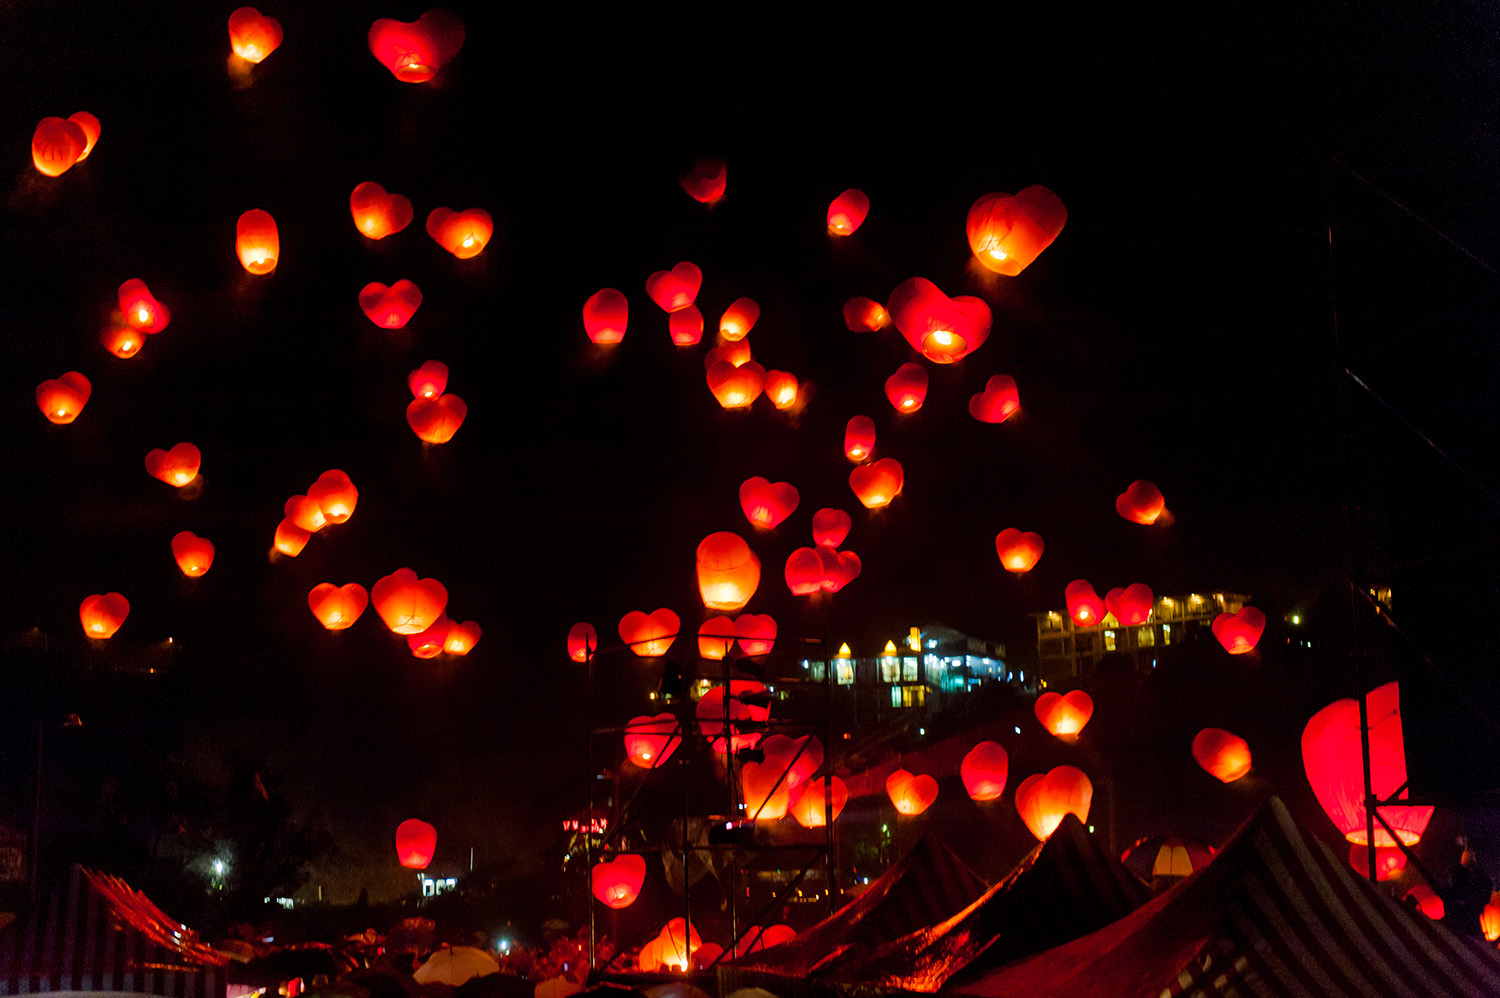 As the main event of  Pingxi Sky Lantern Festival, at Shifen Sky Lantern Square on the Fifteenth day of Lunar New Year, Lantern Festival, Taipei,Taiwan